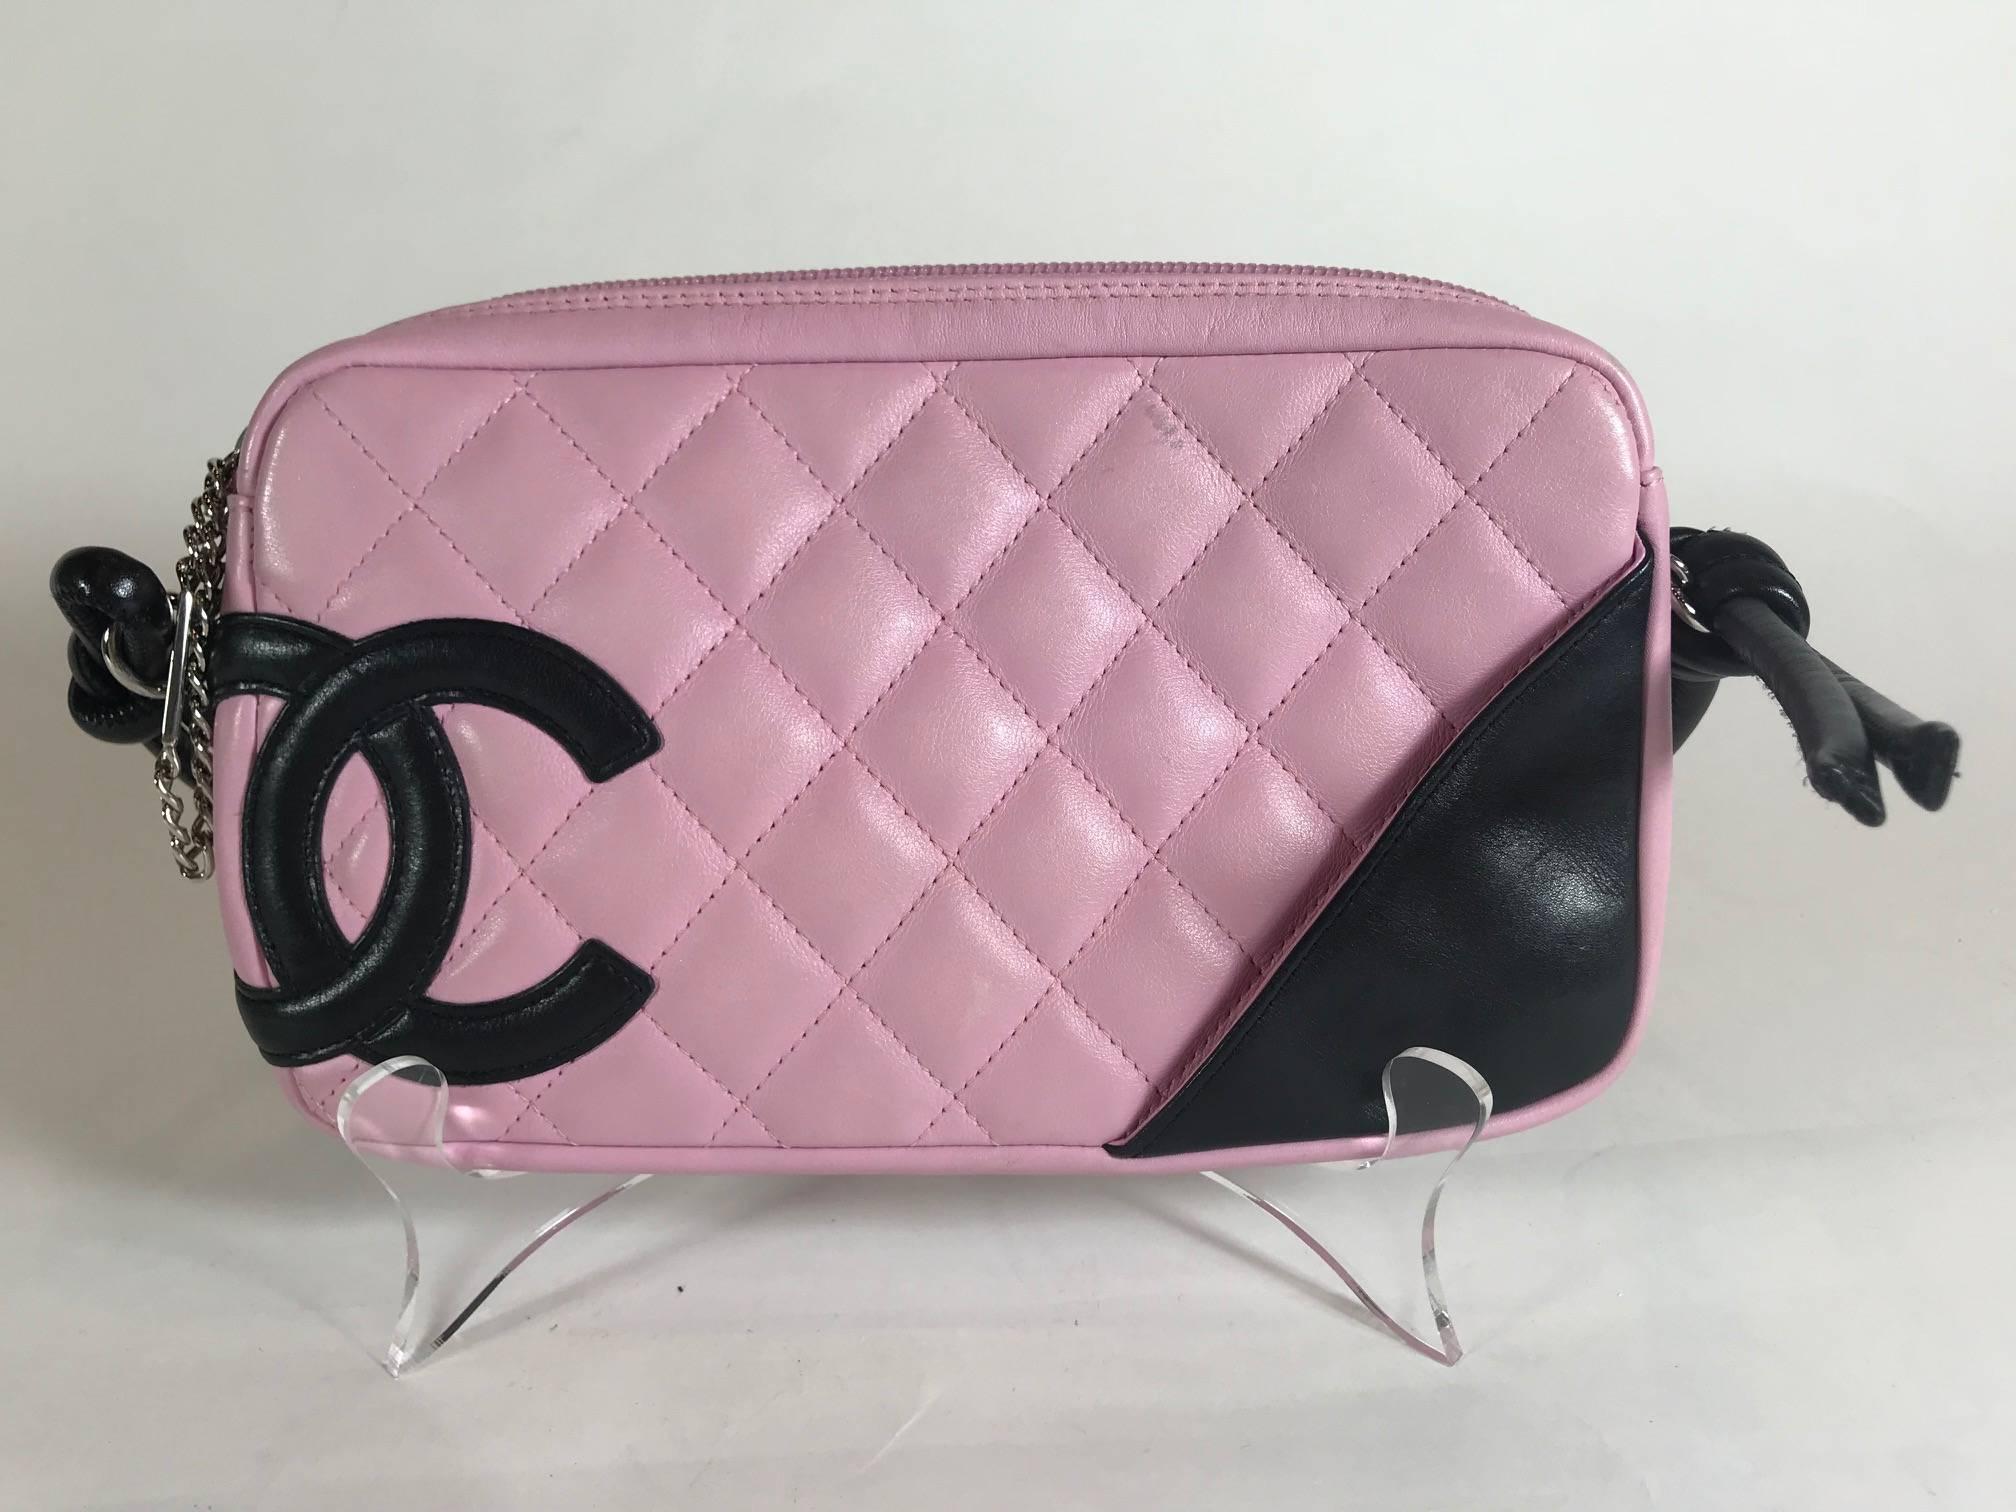 Pink quilted leather. Silver-tone hardware. Zip closure at top. Black leather trim. Single rolled shoulder strap. 